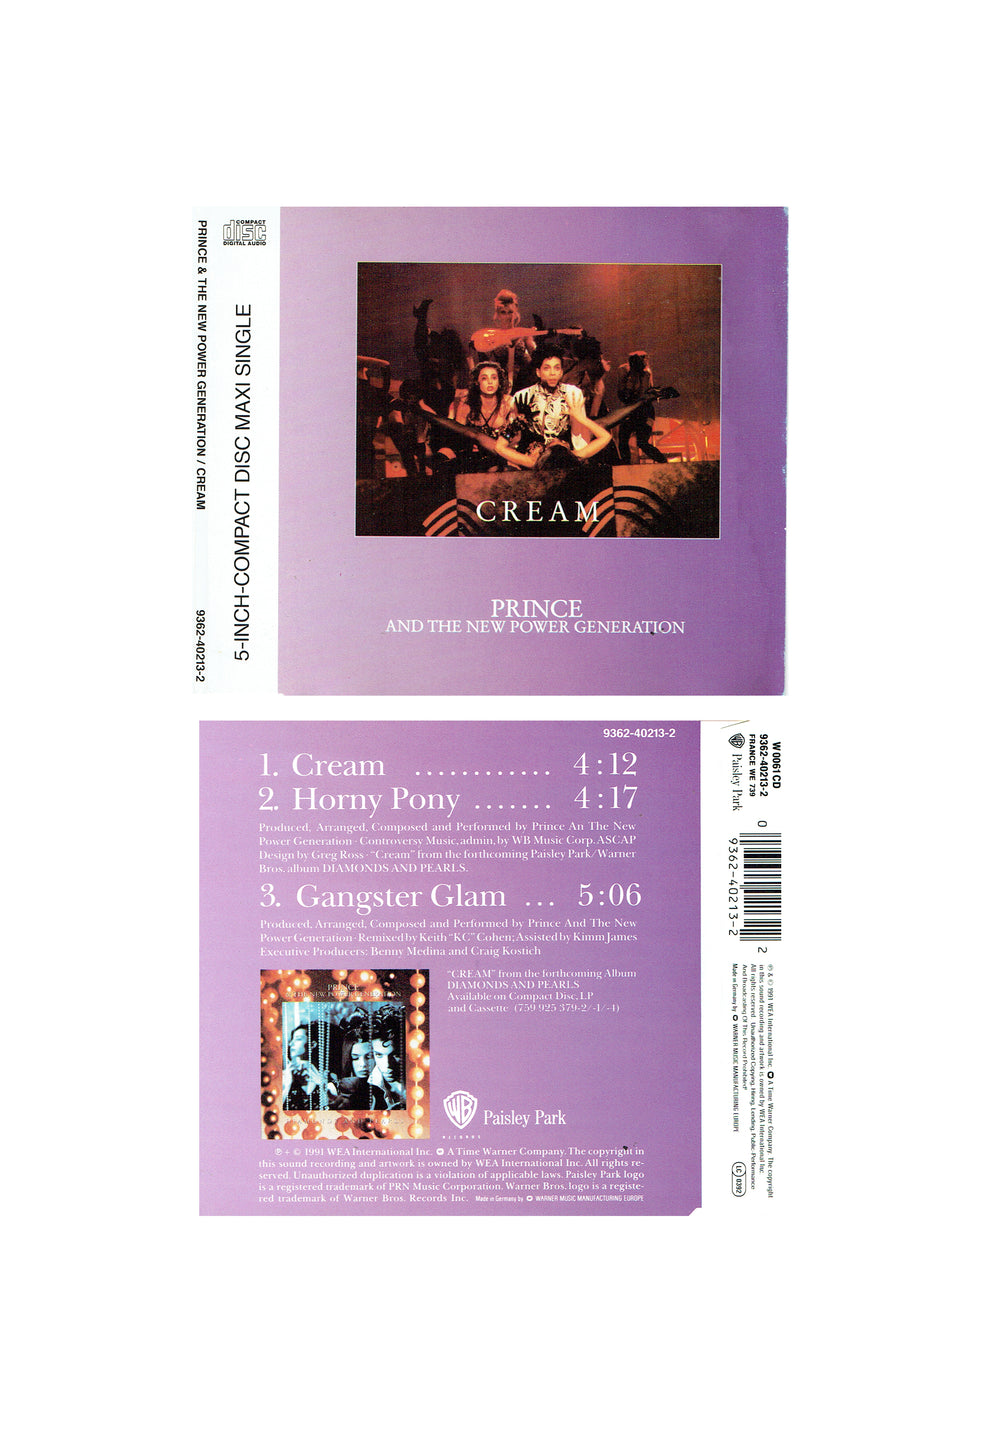 Prince – & The New Power Generation - Cream CD Maxi-Single Europe Preloved: 1991